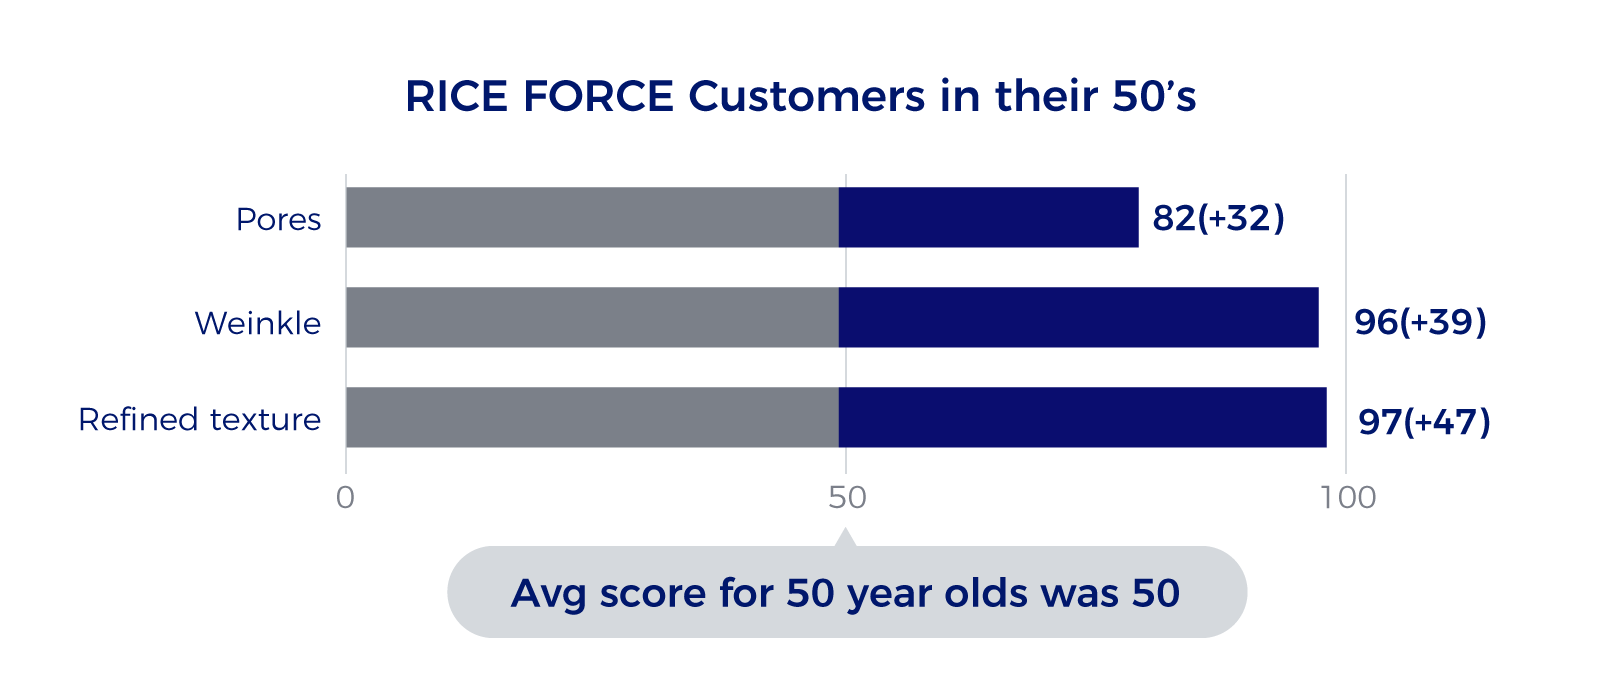 RICE FORCE Customers in their 50’s